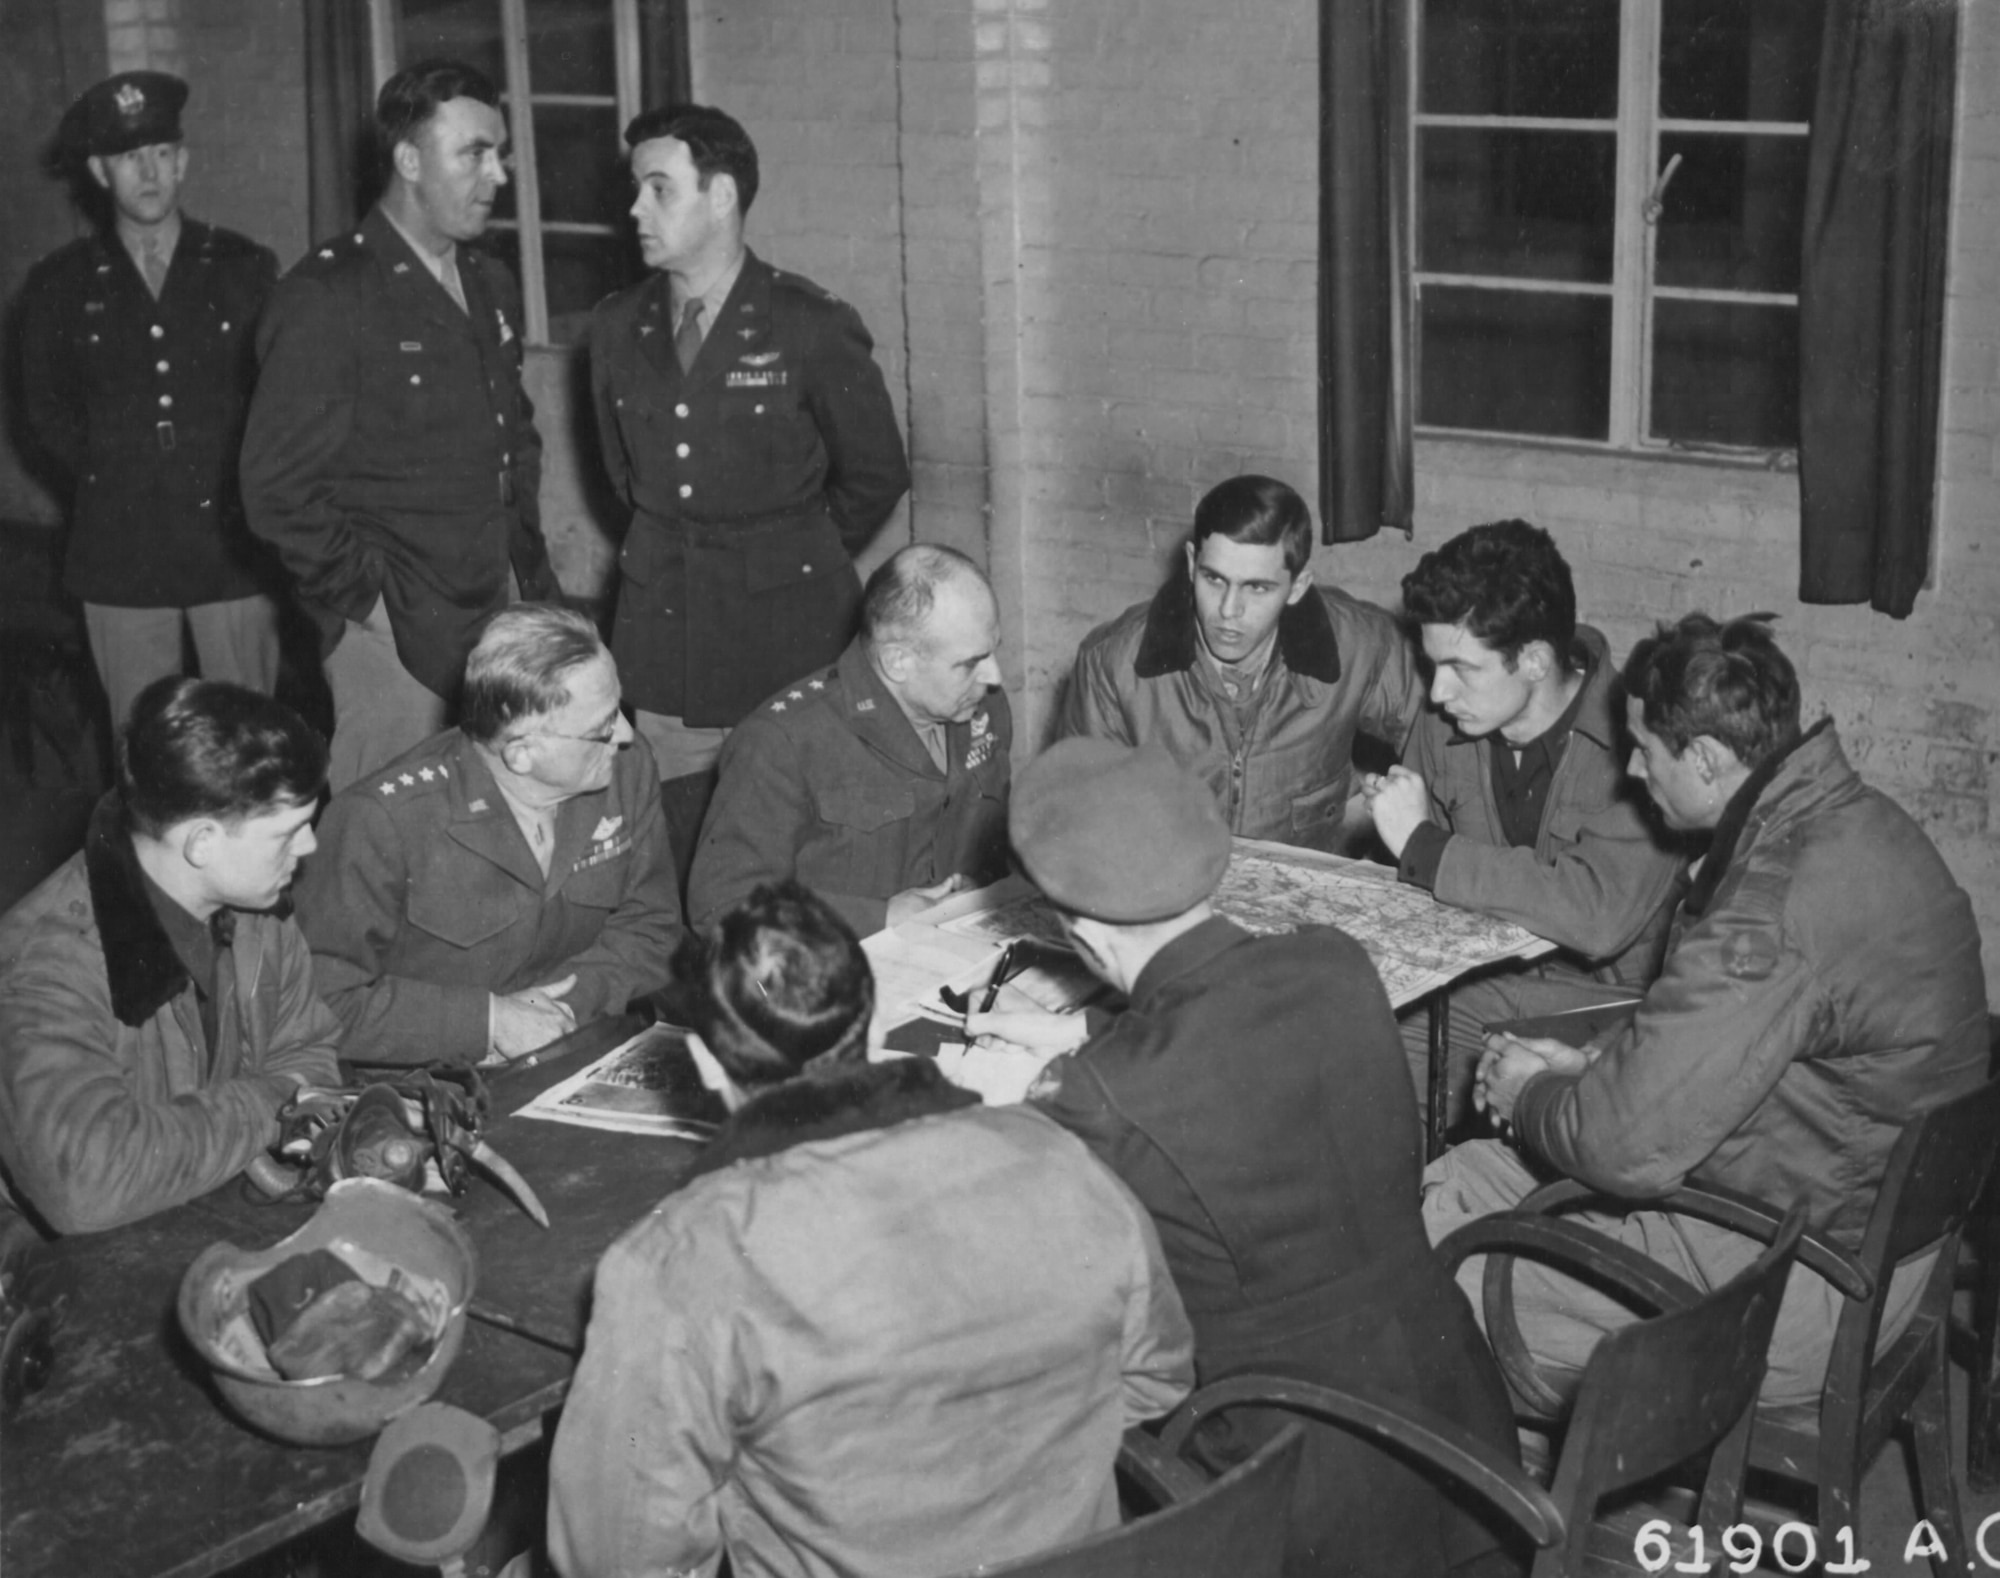 Gen Spaatz (2nd from left) and Lt Gen Doolittle (3rd from left) discuss results of a bombing attack with Eighth Air Force Airmen who just returned from the mission (note armored helmet and oxygen mask on the table).